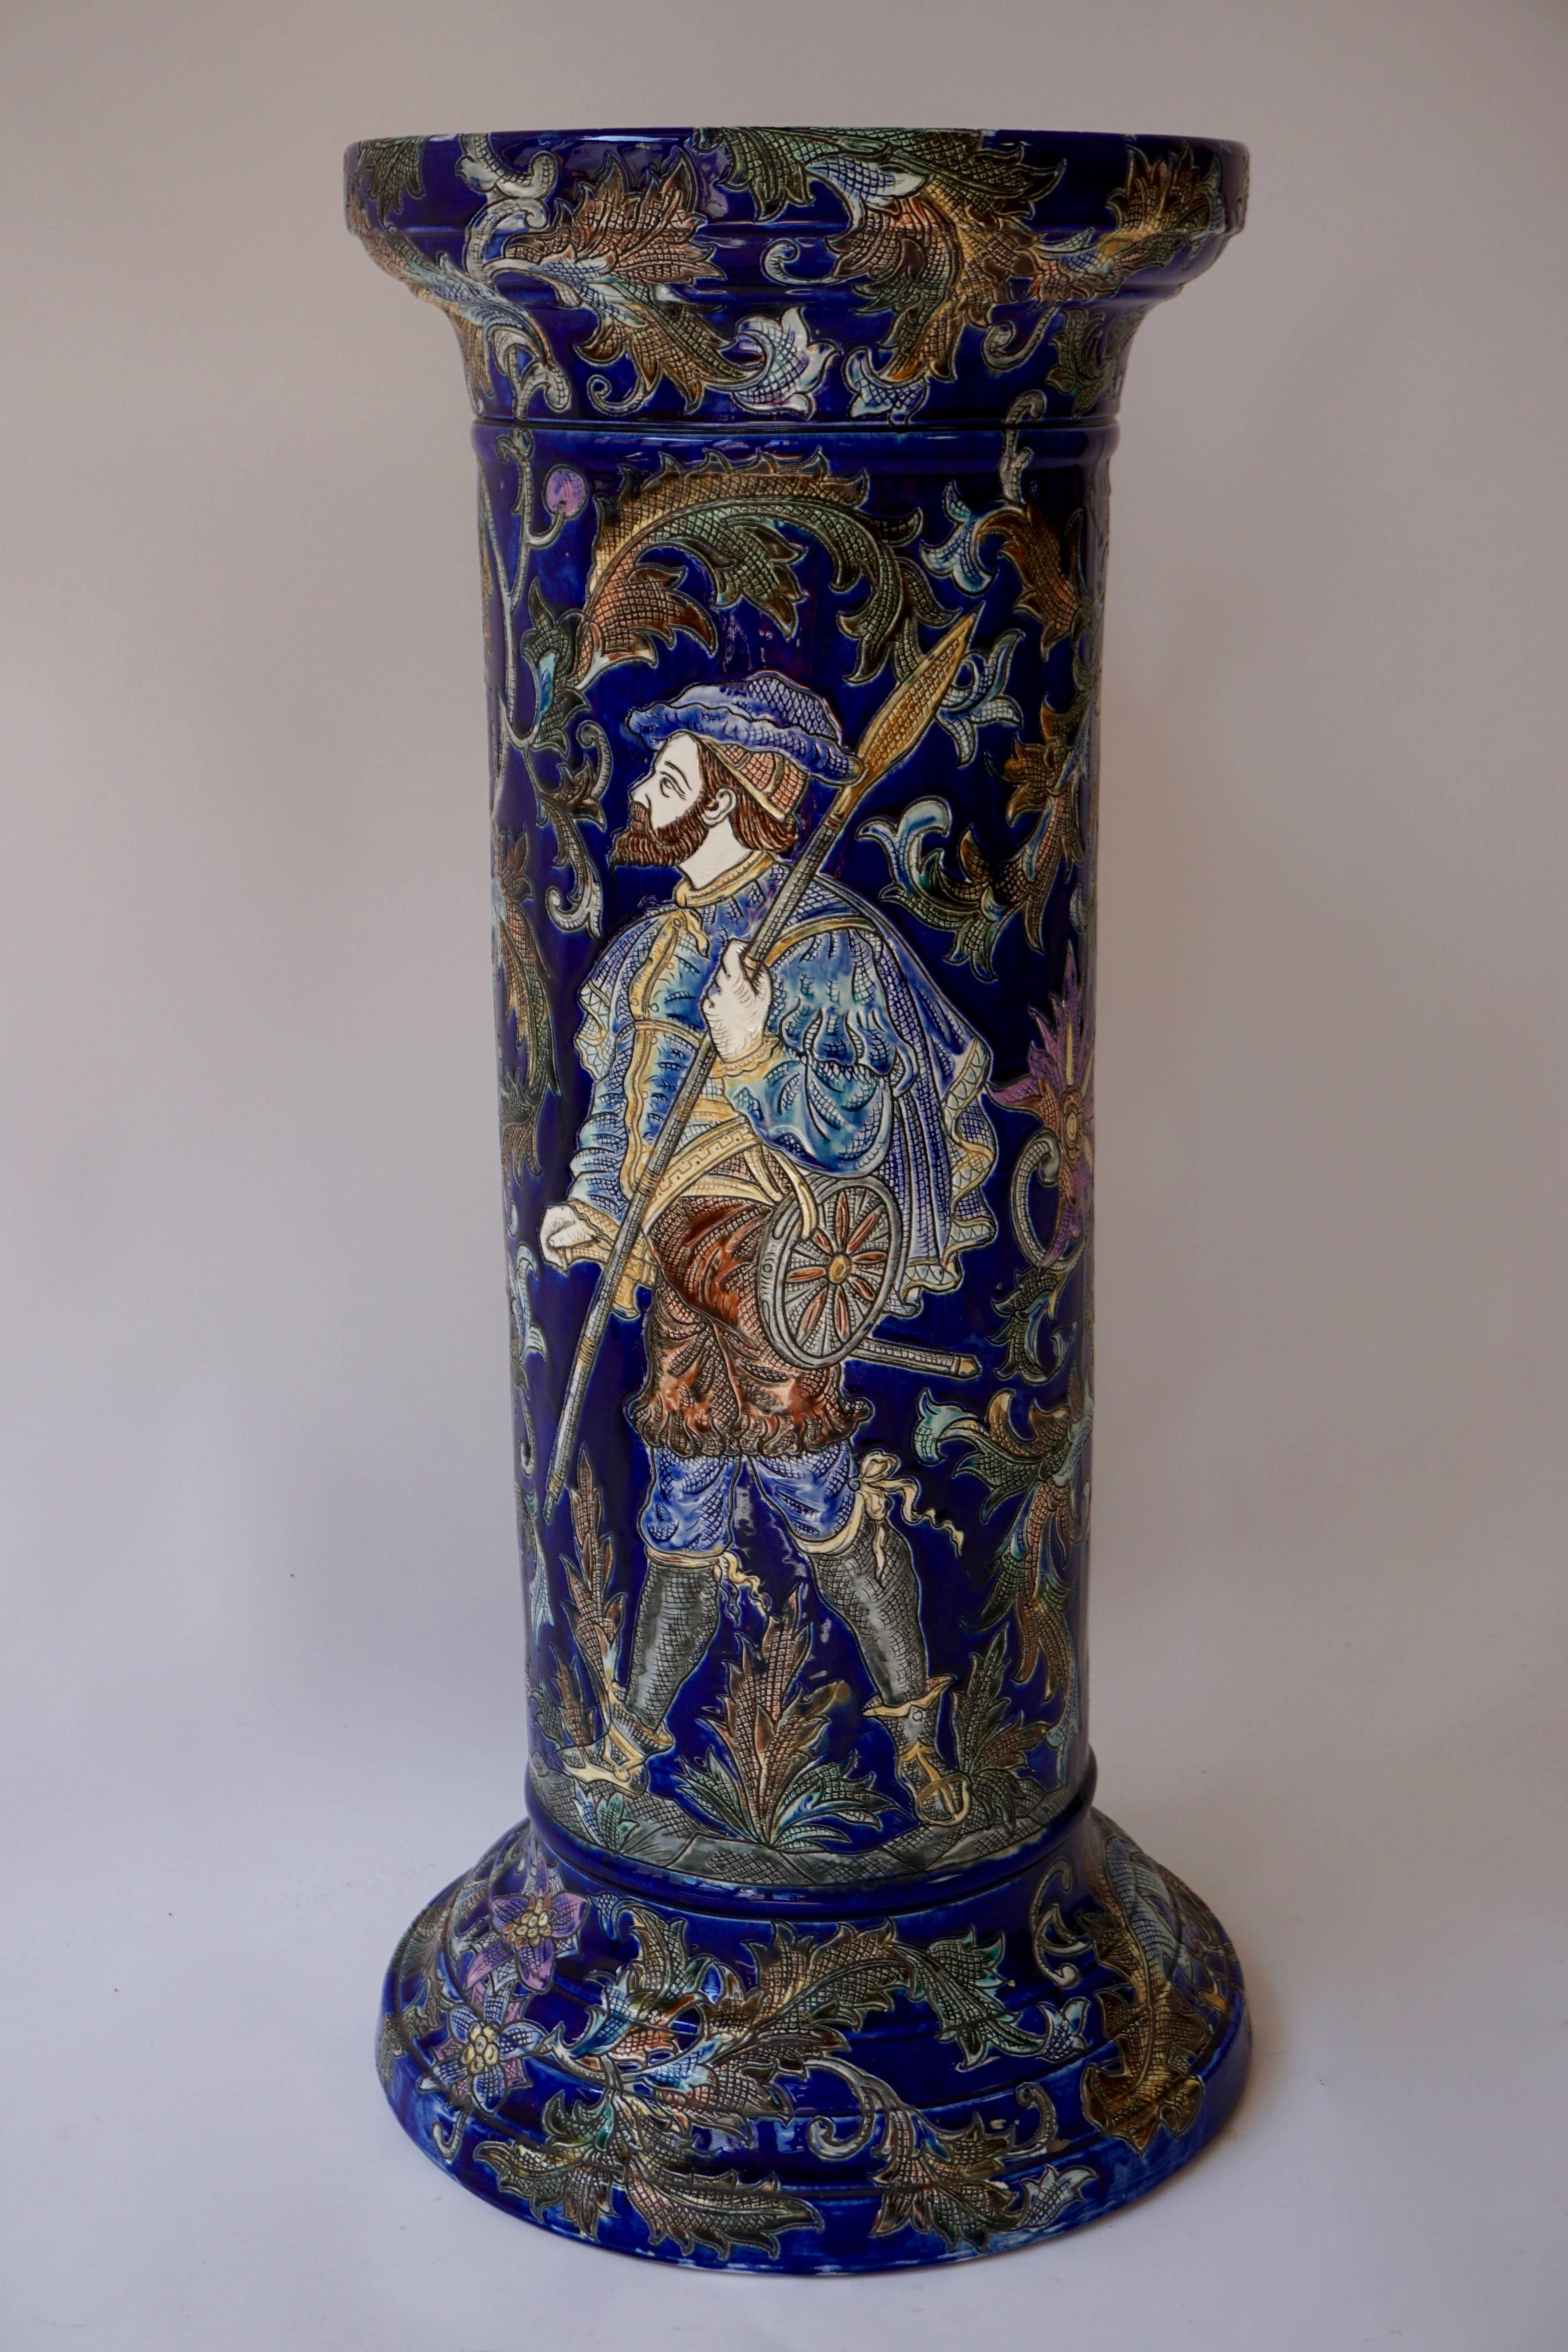 Glazed ceramic column pedestal or flower stand decorated with flower motifs and with a nobleman with his spear.

Measures:Height: 77 cm.
Diameter: 33 cm.